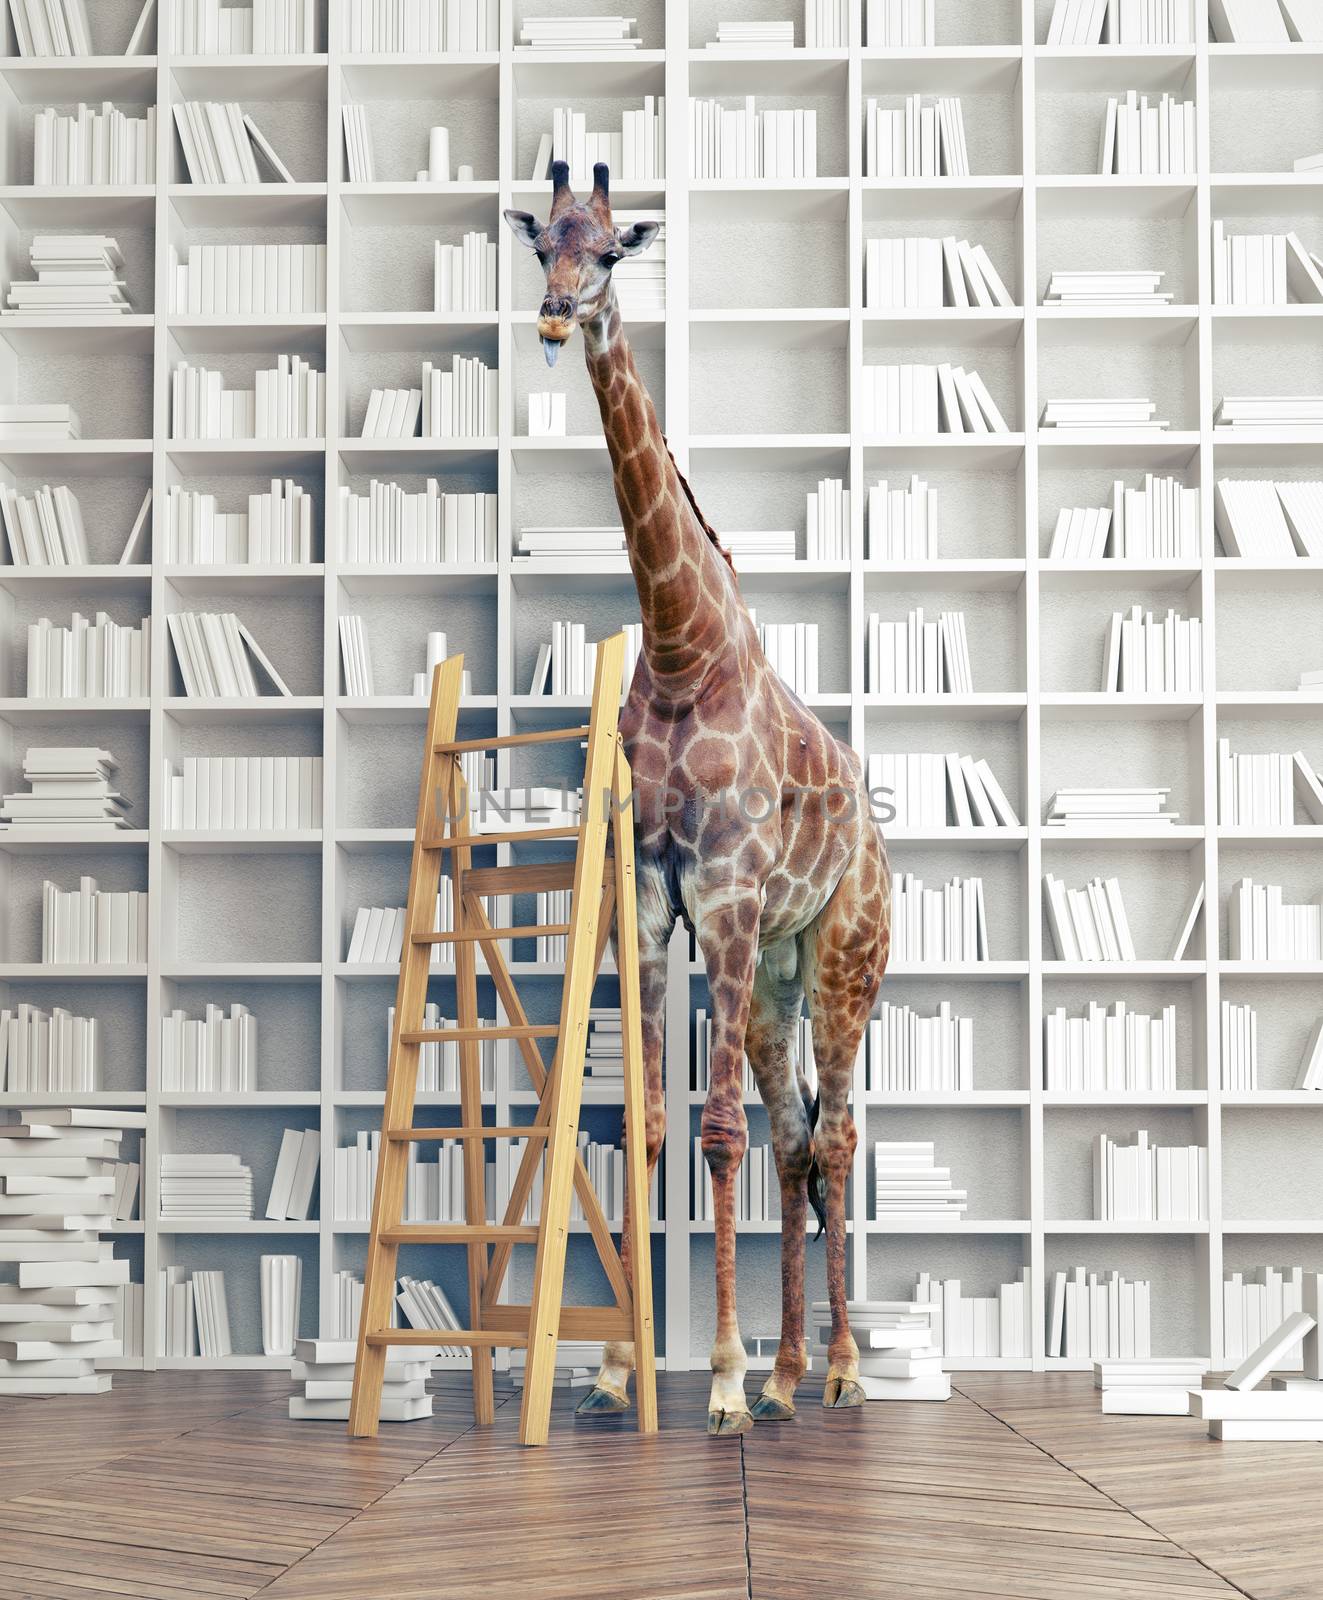 giraffe  in the room with book shelves. Creative photo combination concept